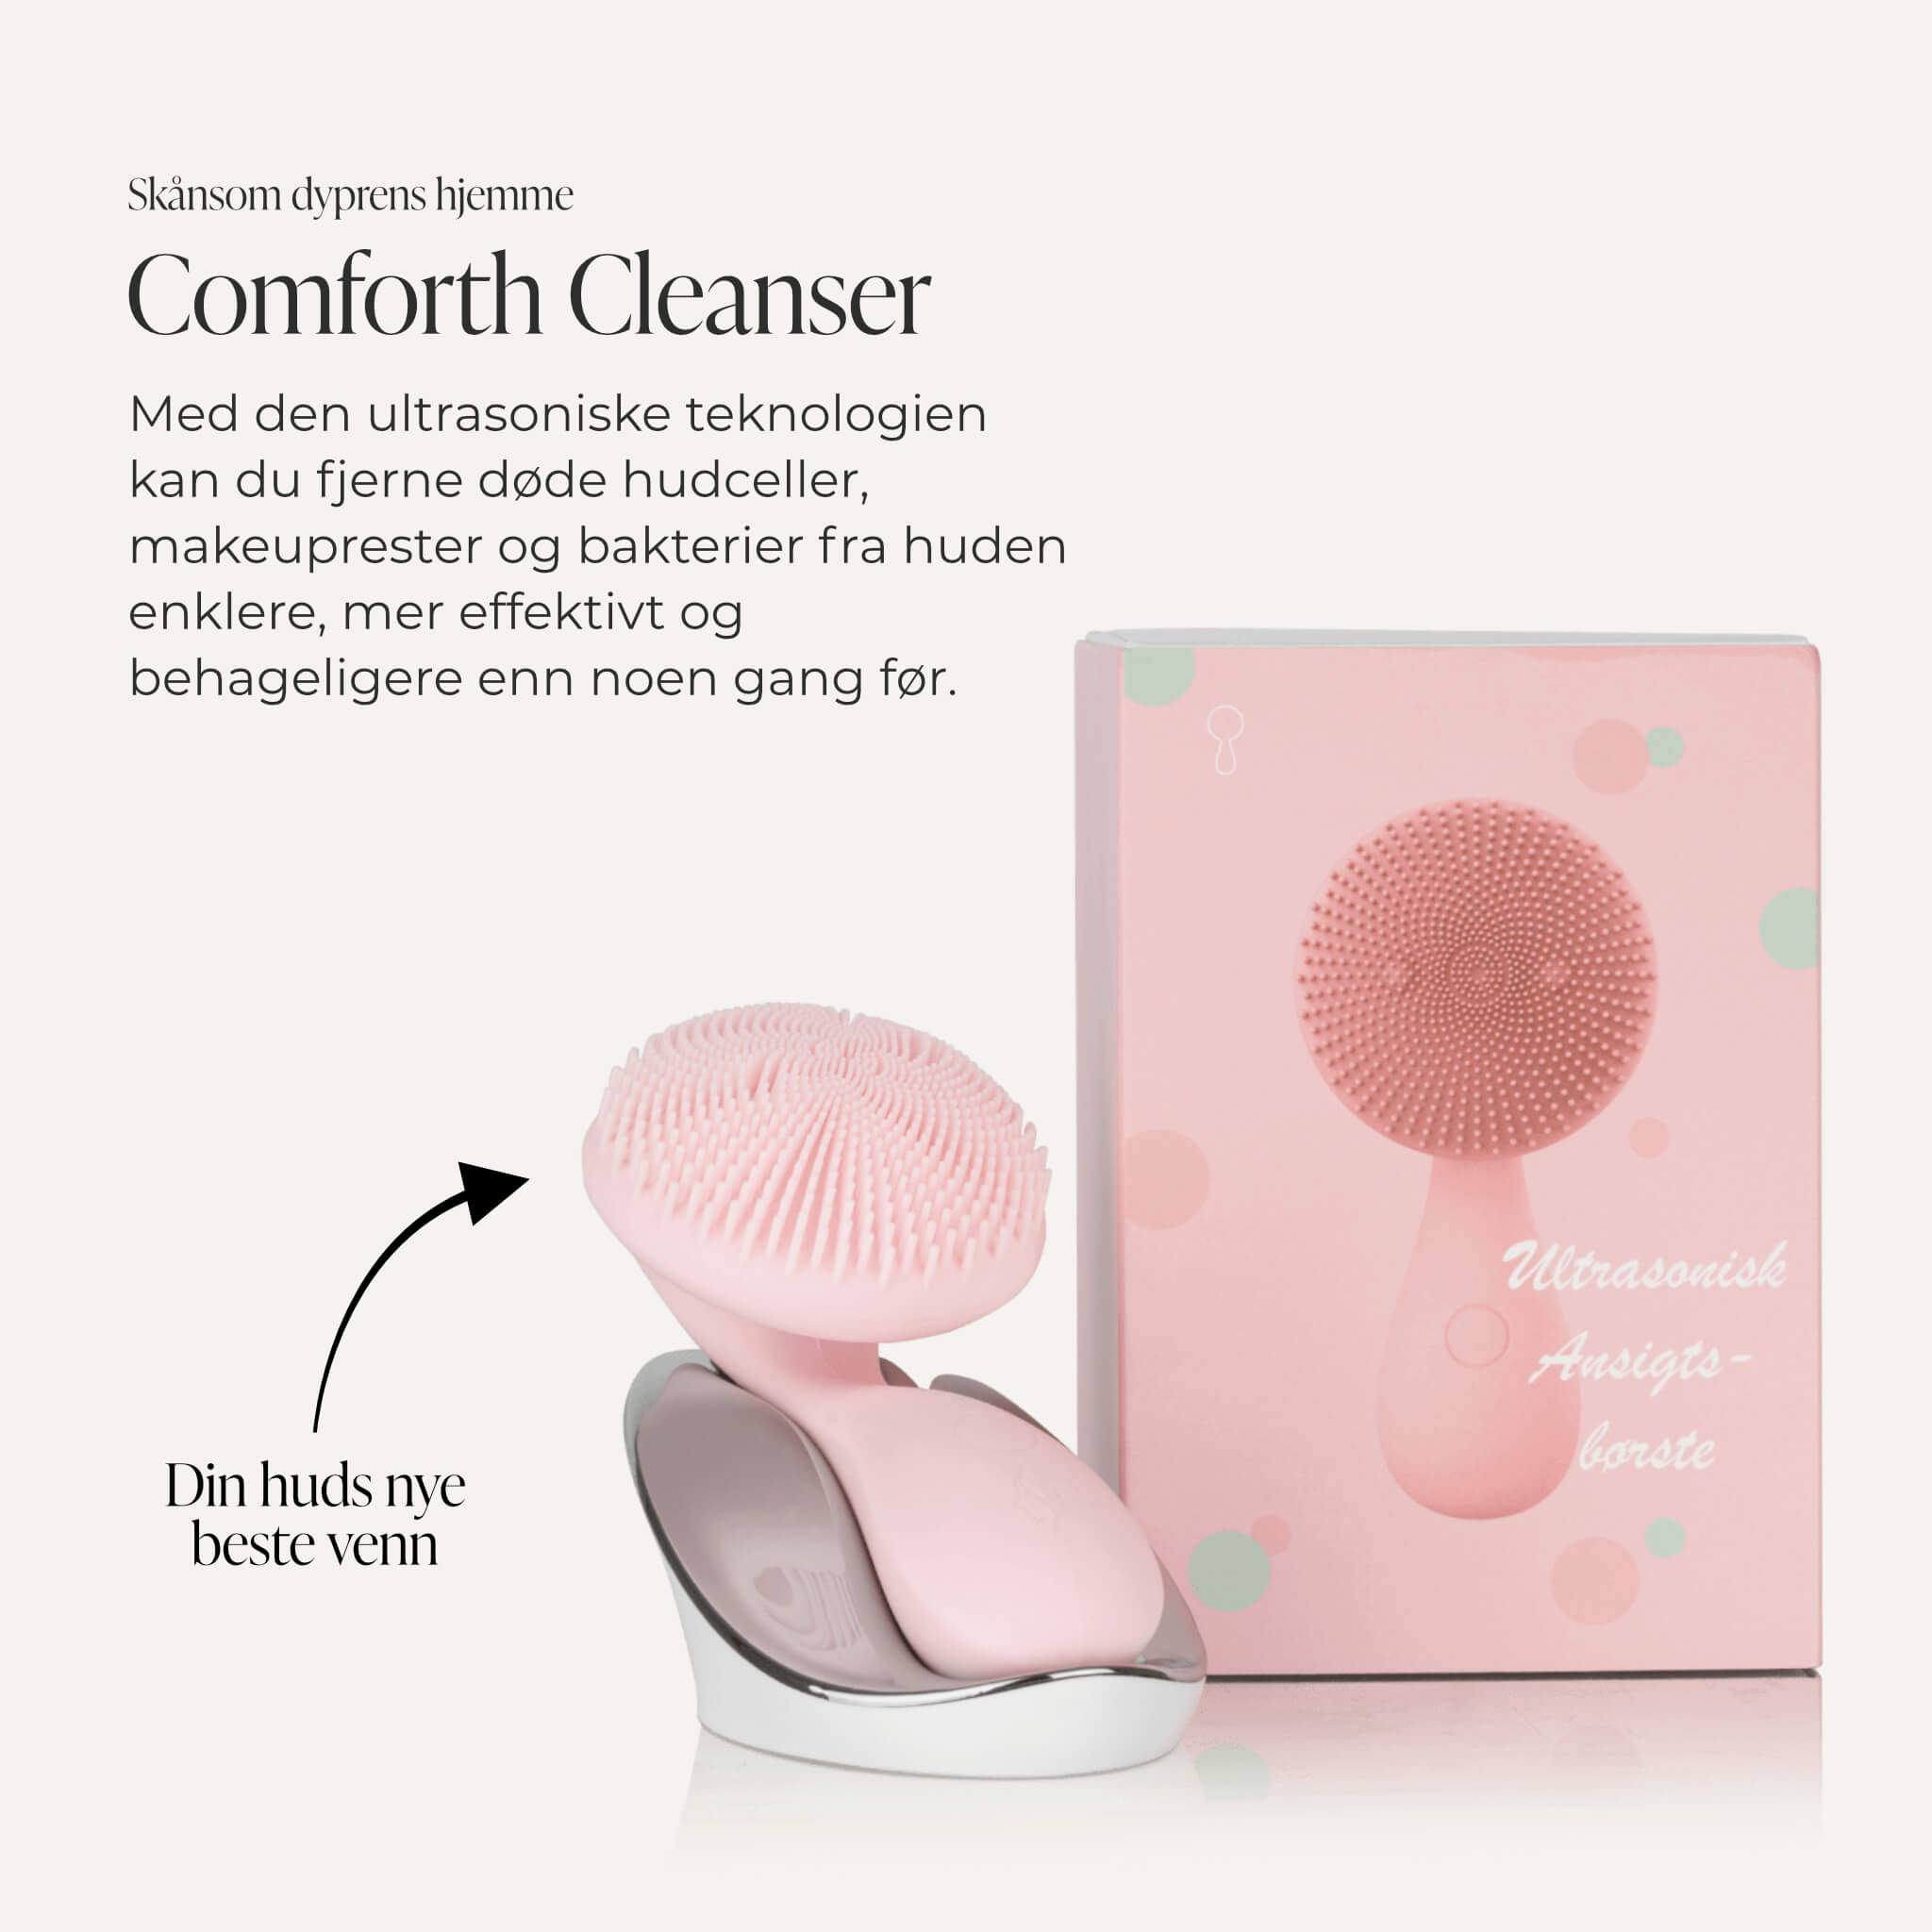 Comforth Cleanser